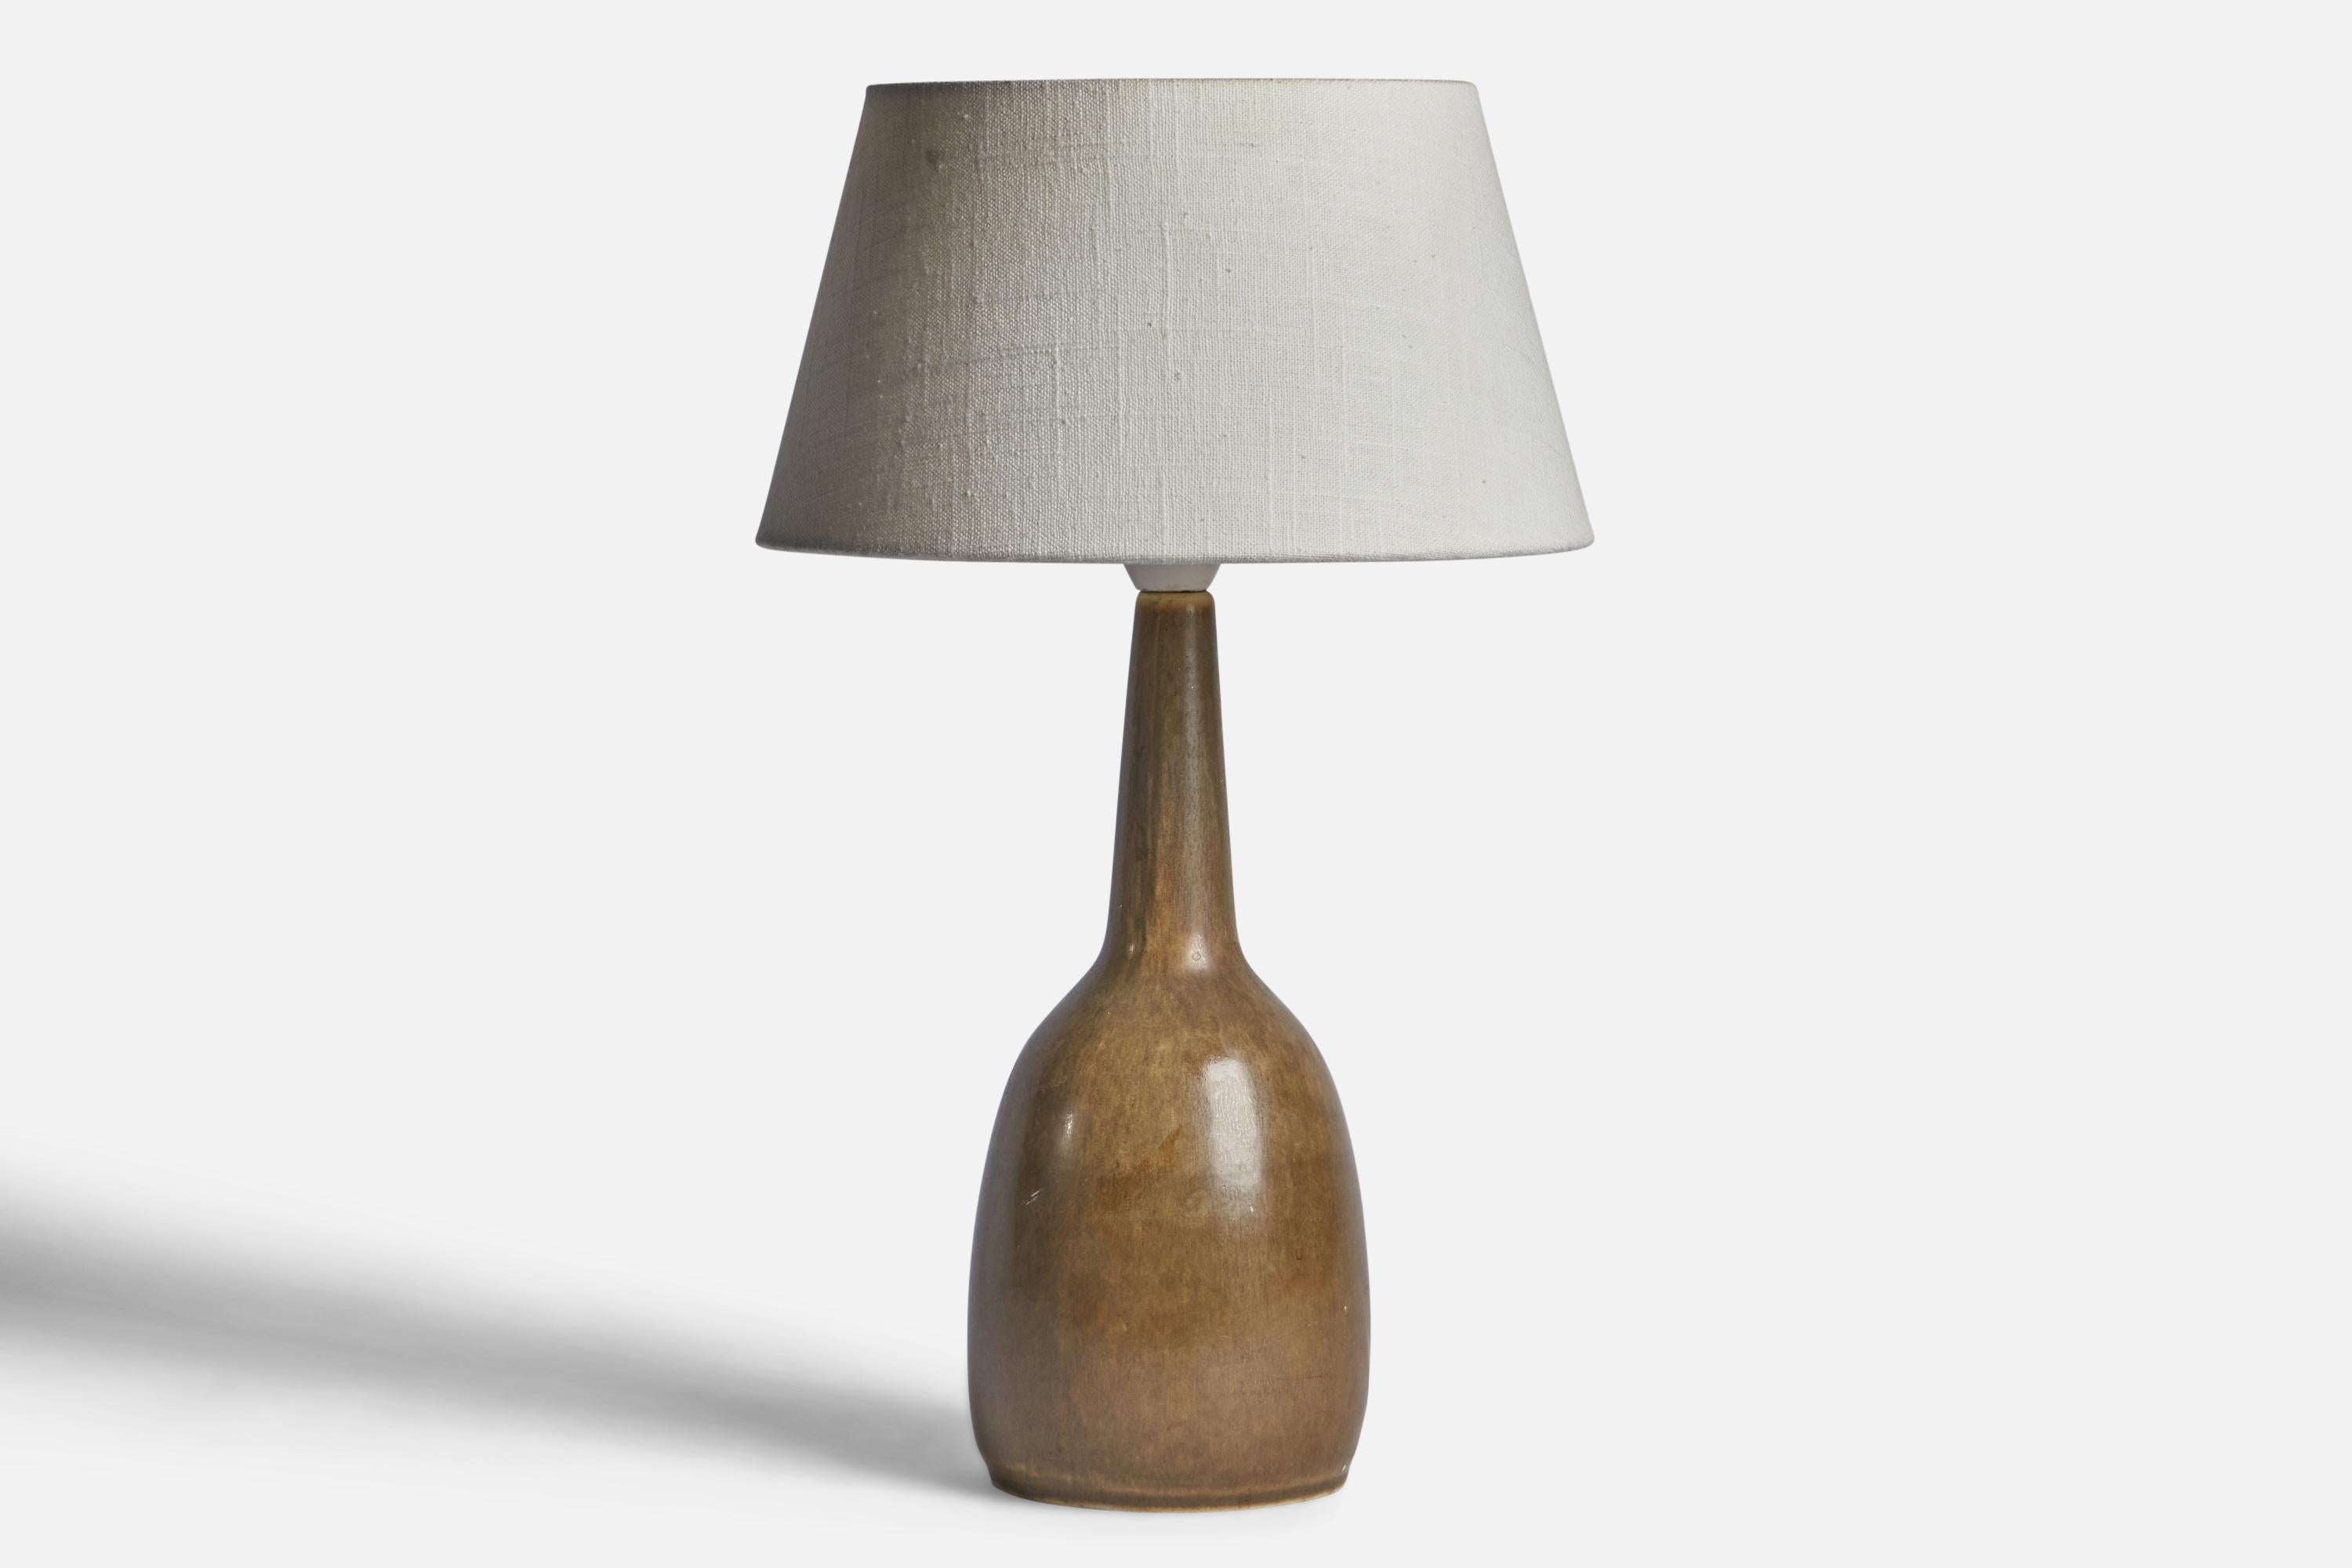 A brown-glazed stoneware table lamp designed by Per & Annelise Linneman-Schmidt and produced by Palshus, Denmark, 1960s.

Dimensions of Lamp (inches): 13.9” H x 4.95” Diameter
Dimensions of Shade (inches): 7” Top Diameter x 10” Bottom Diameter x